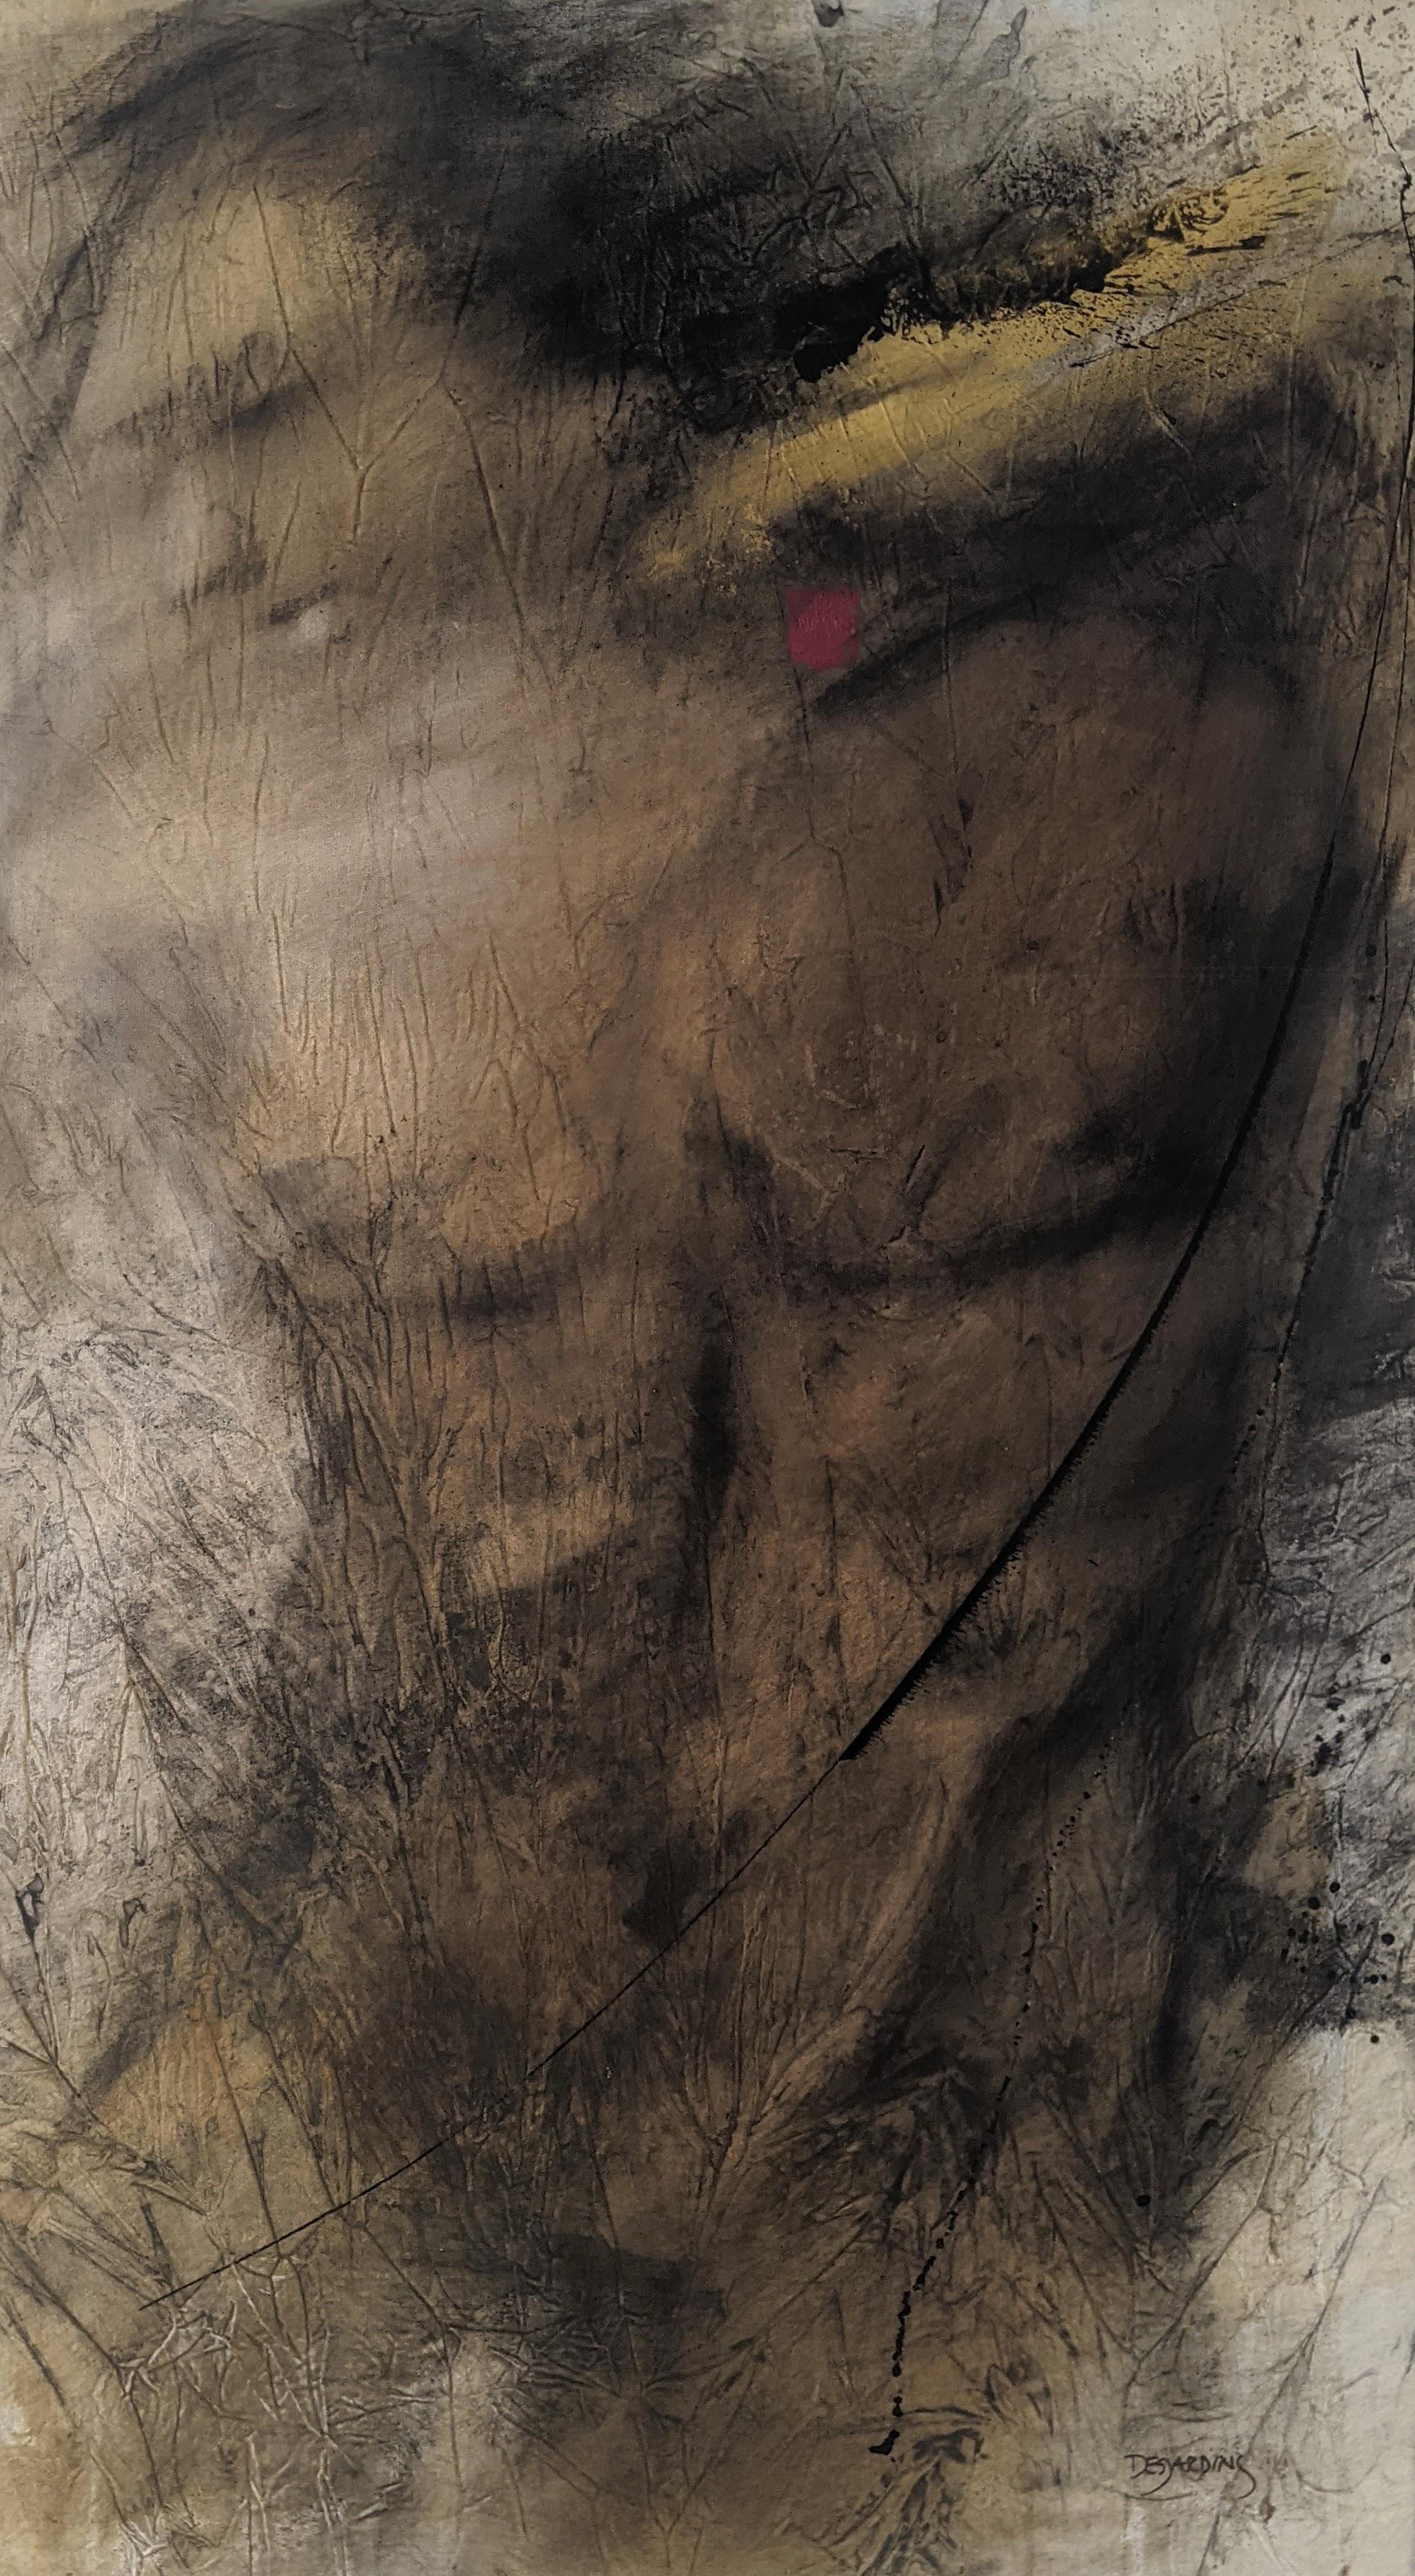 Painting, Mixed Media, Earth Tones, Nude, Male, Abstract Figure by Desjardins